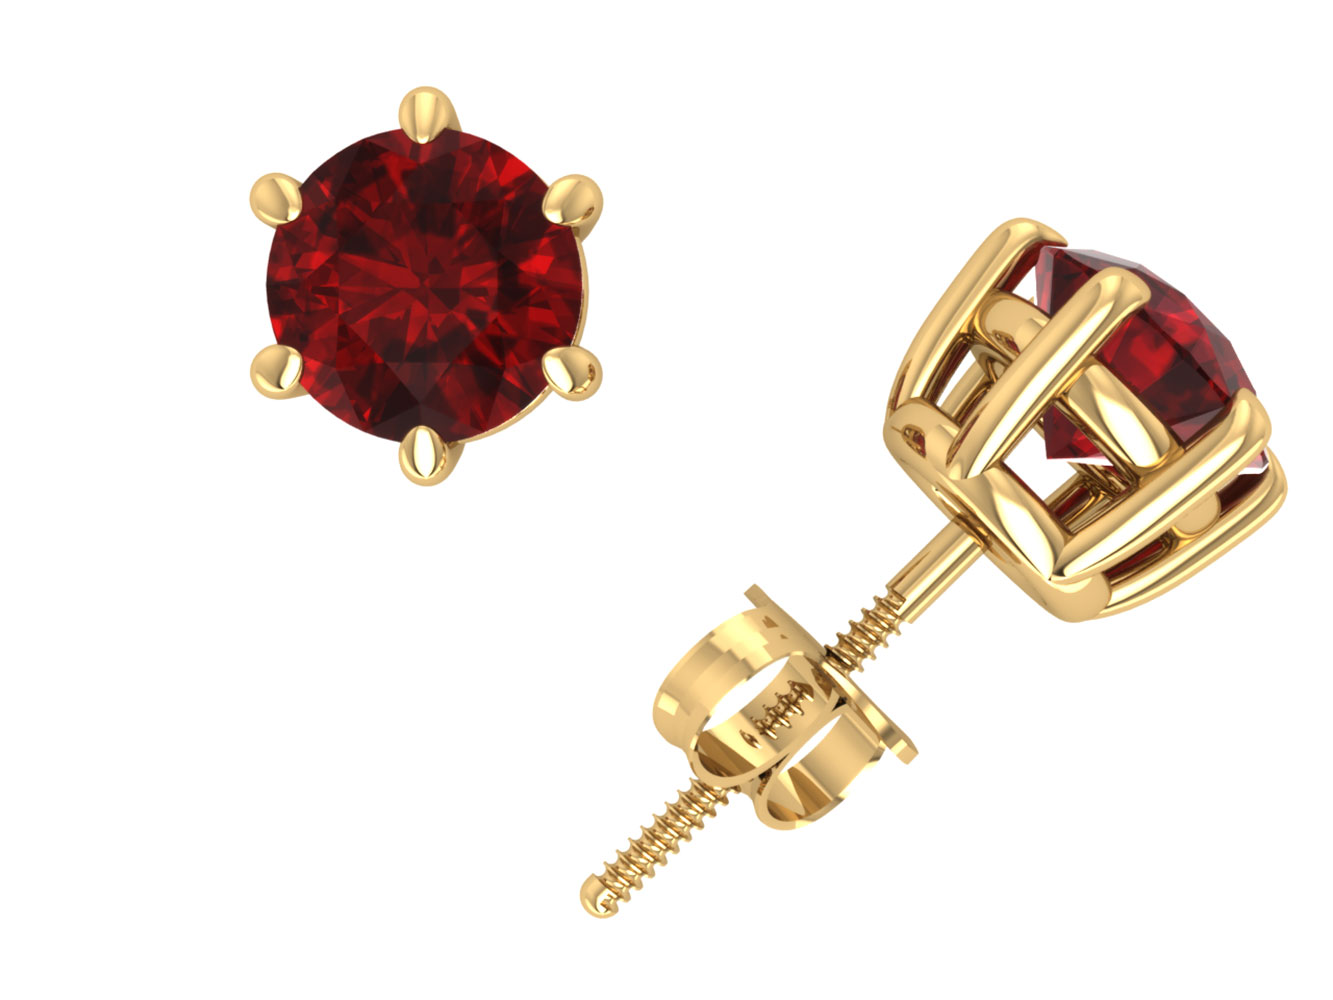 Jewel We Sell Natural 1Ct Round Cut Ruby Basket Stud Earrings 14k White or Yellow Gold Prong ScrewBack Commercial Quality